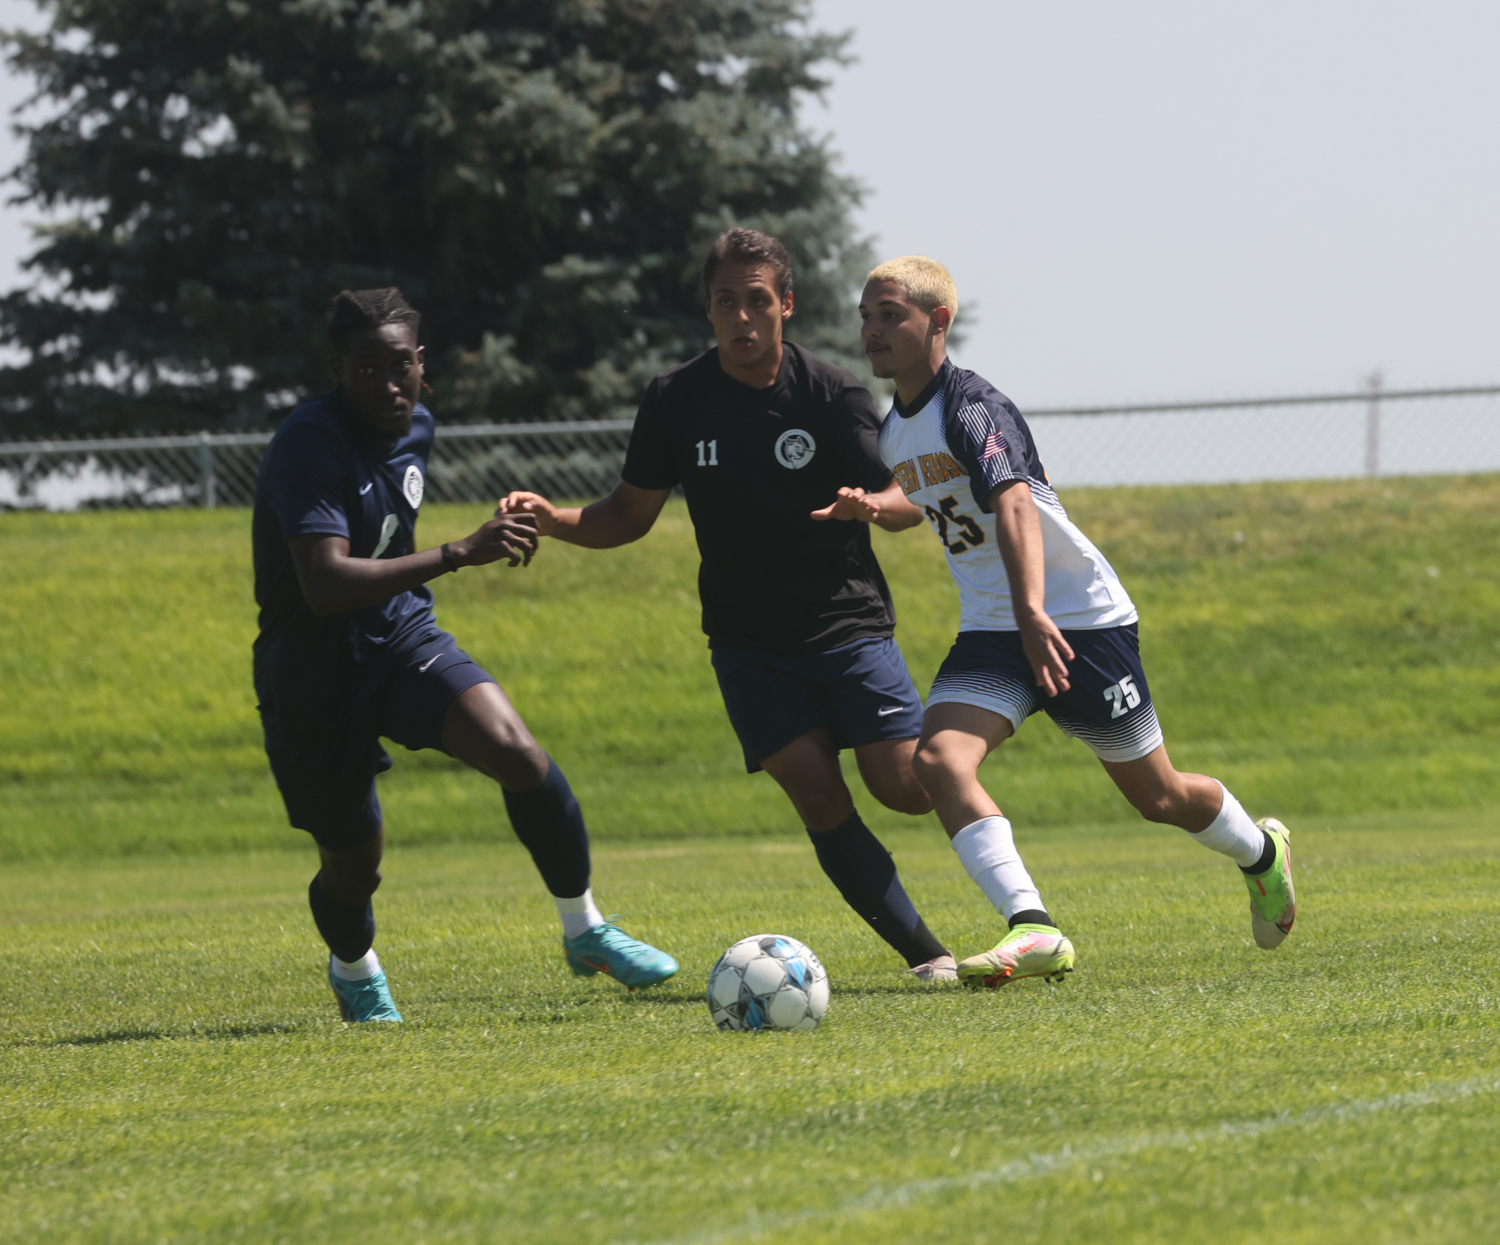 Action in the WNCC and Southeast soccer match on August 21.